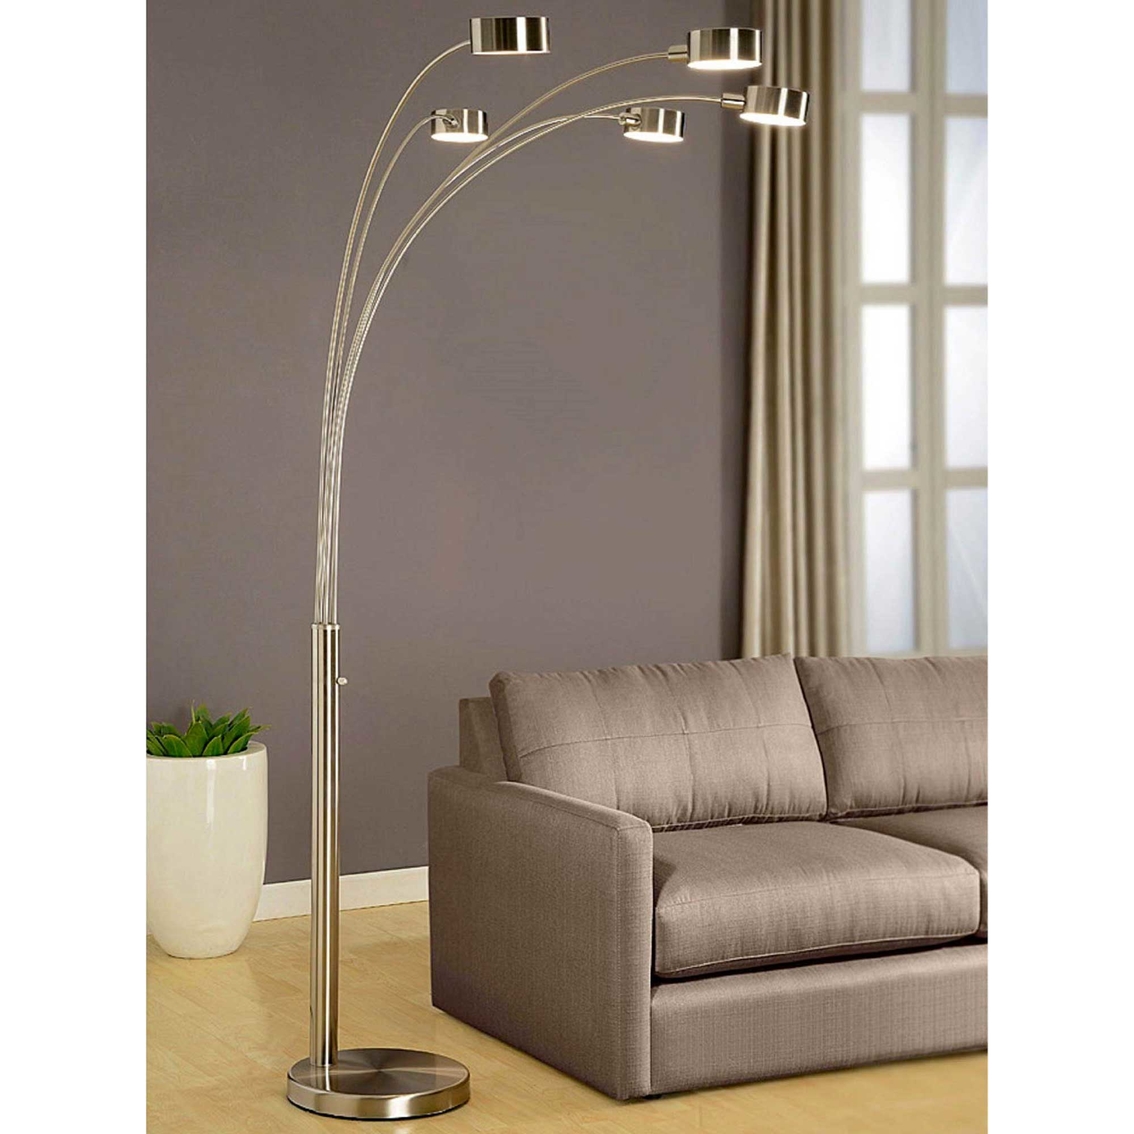 Artiva USA Micah 88 in. Modern 5 Arch Brushed Steel Floor Lamp with Dimmer - Image 2 of 2